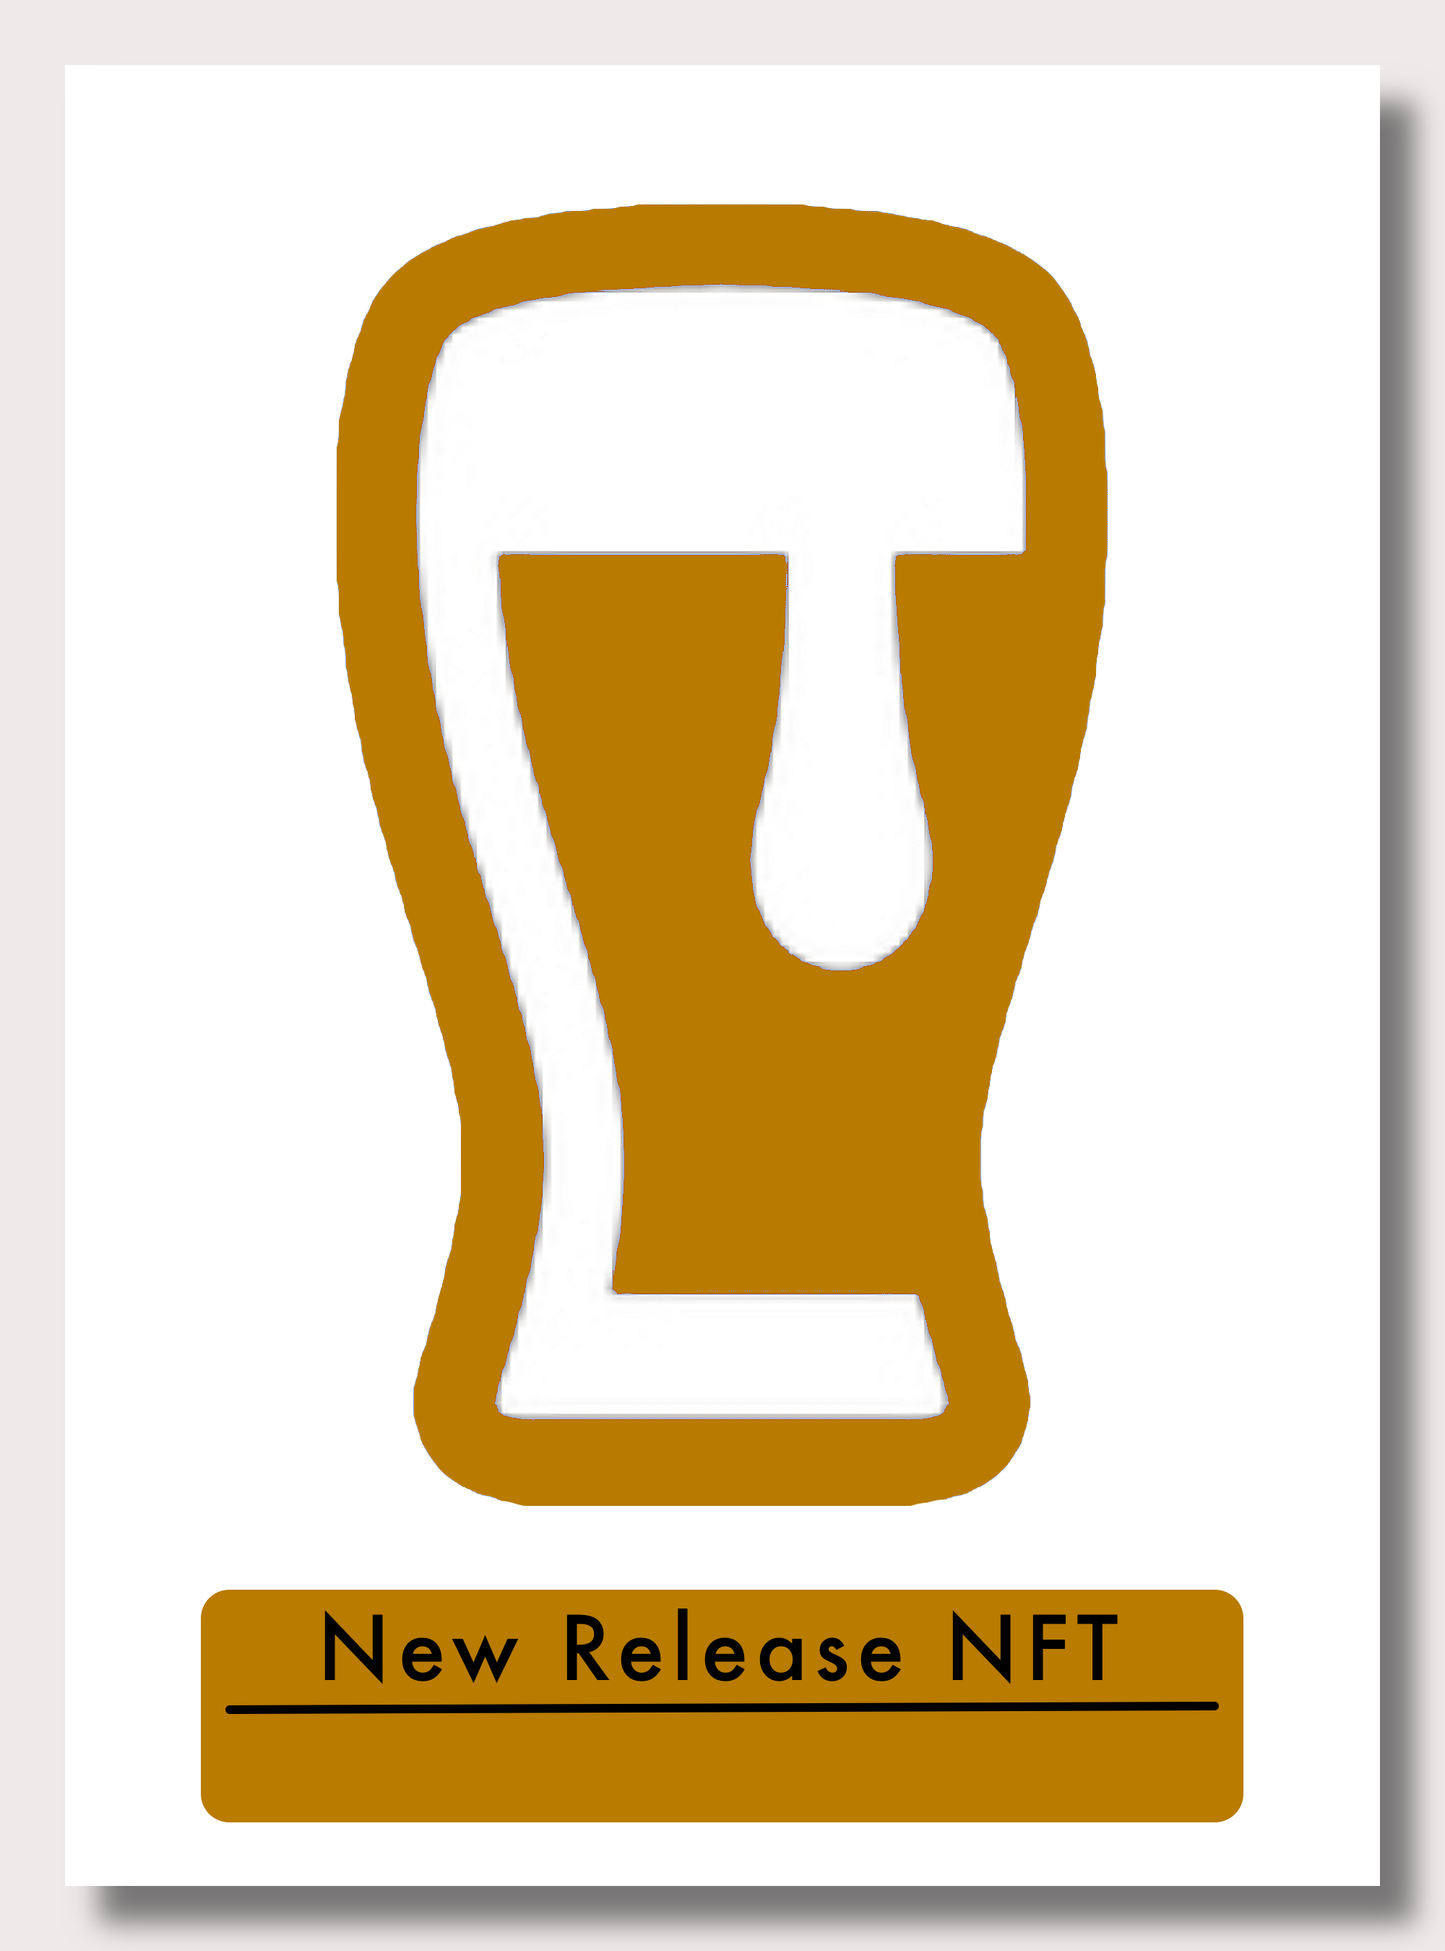 Product Release NFT